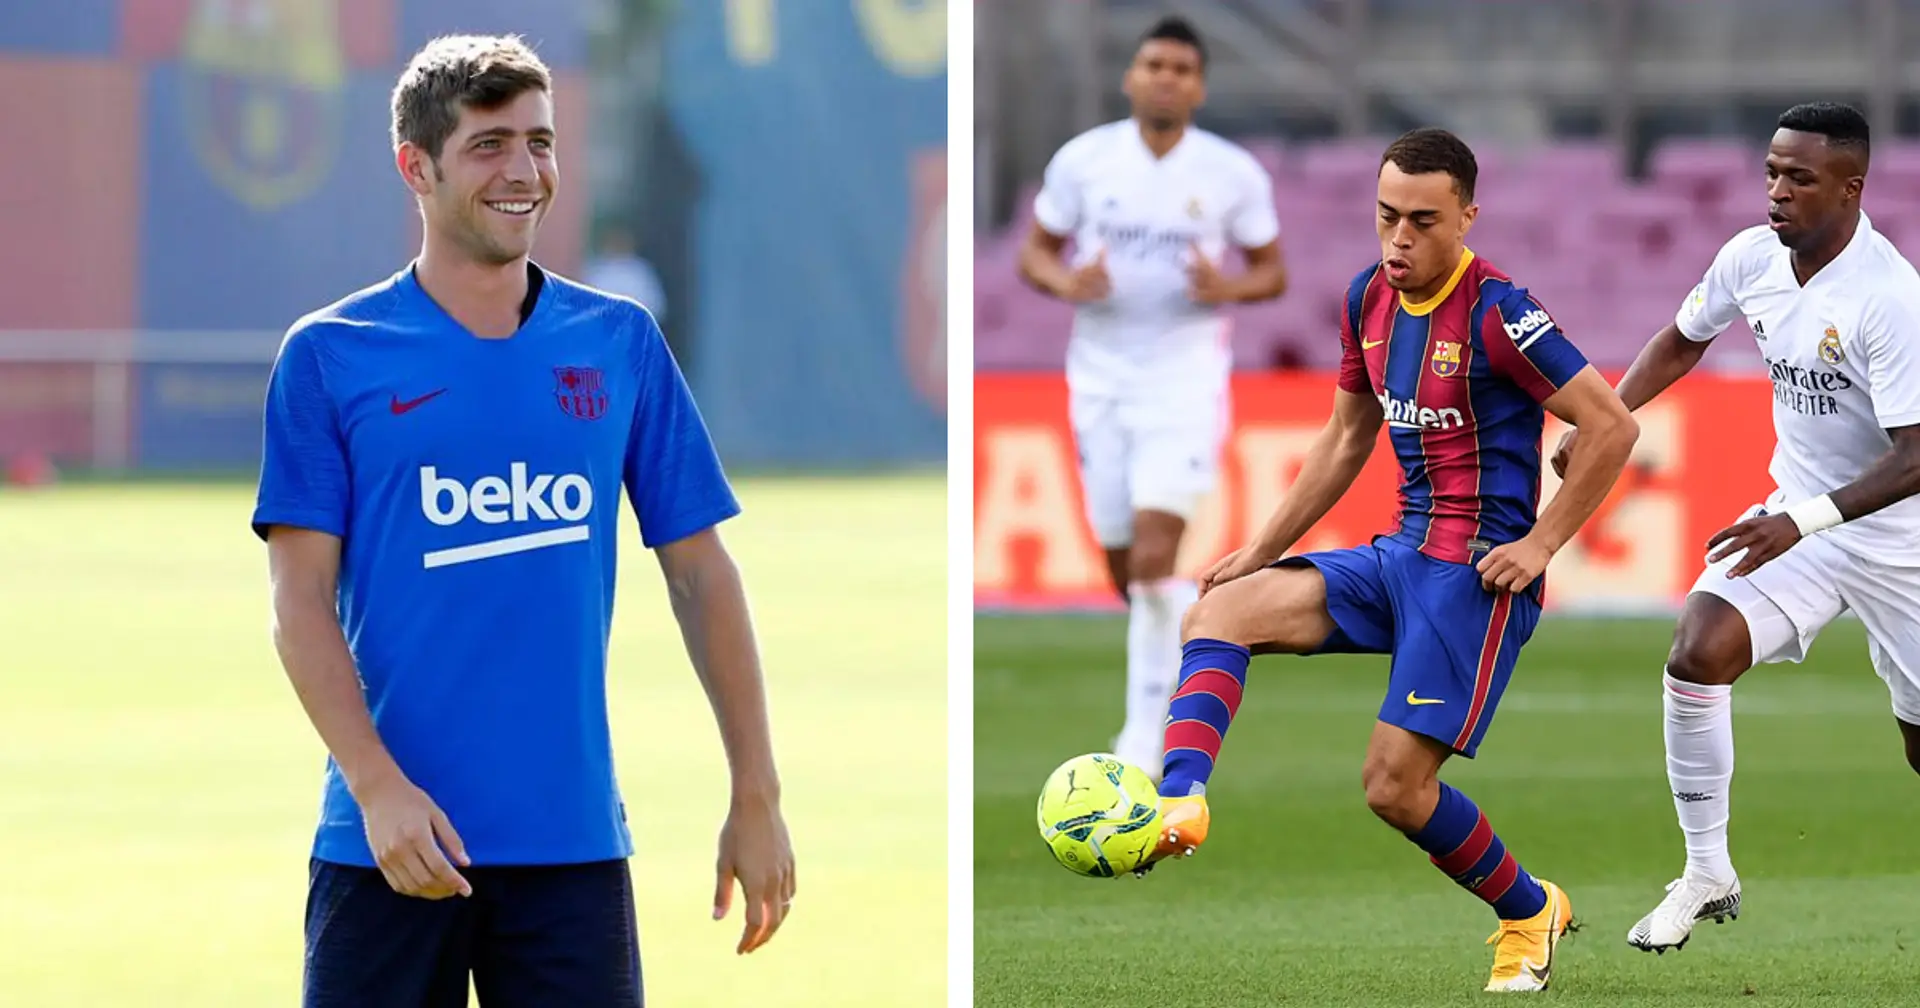 Sergi Roberto trains on Wednesday despite first team having day off - Dest to be dropped vs Athletic?